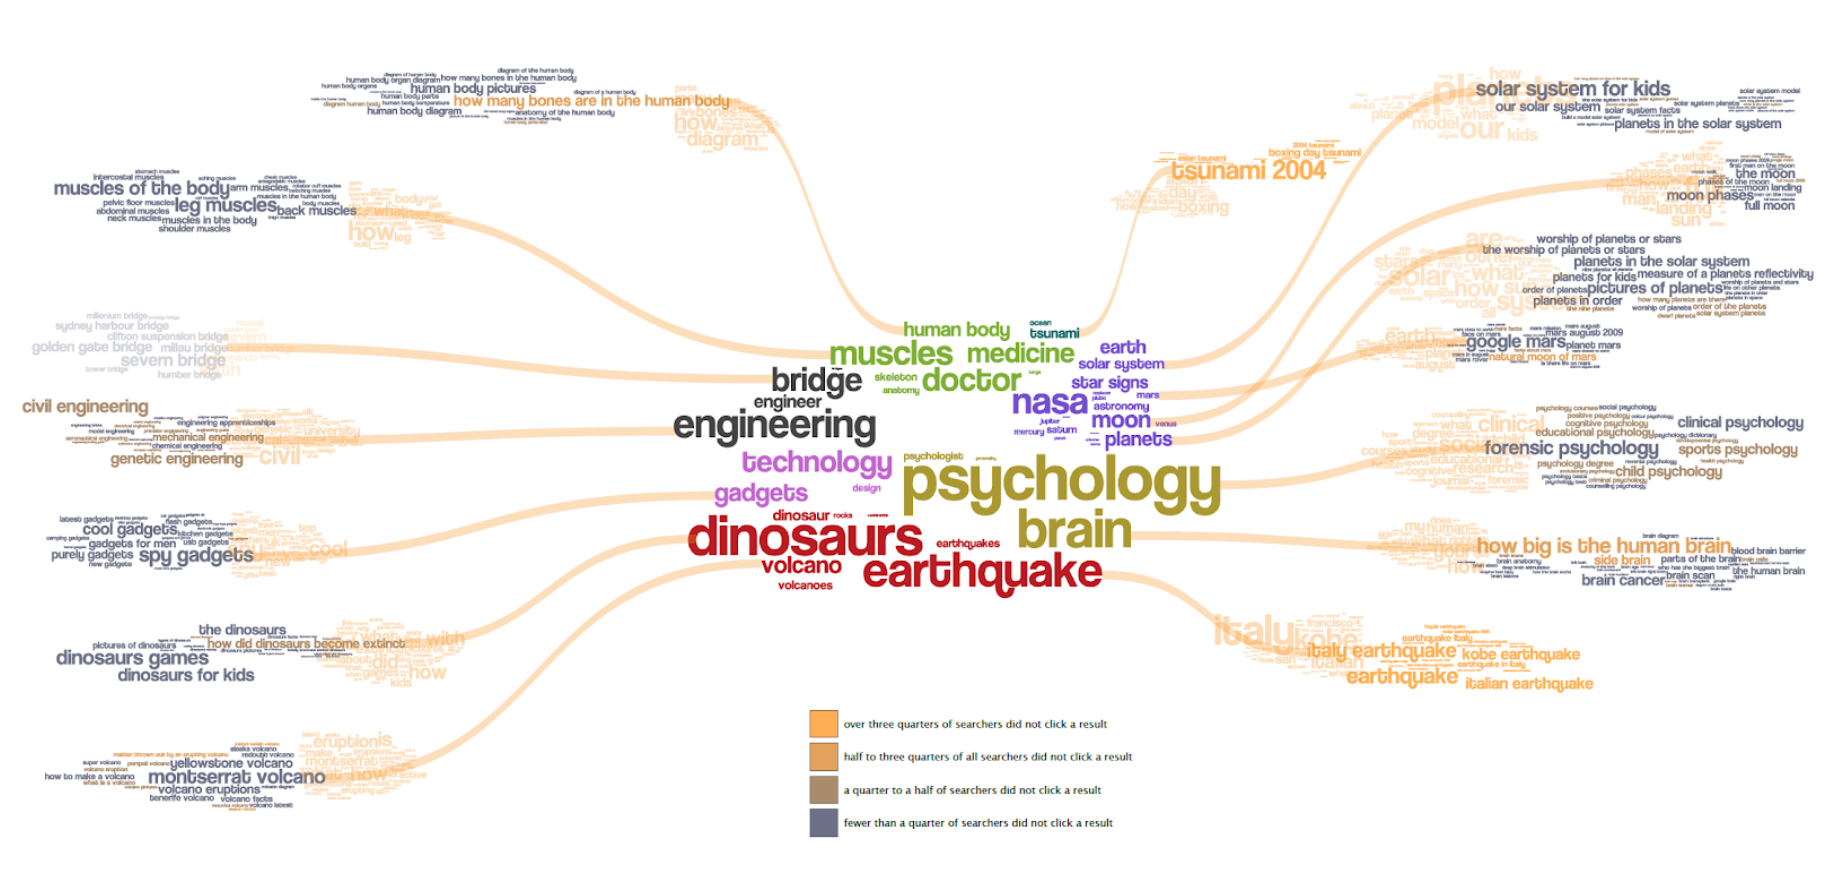 A simple map of unanswered questions about science and nature